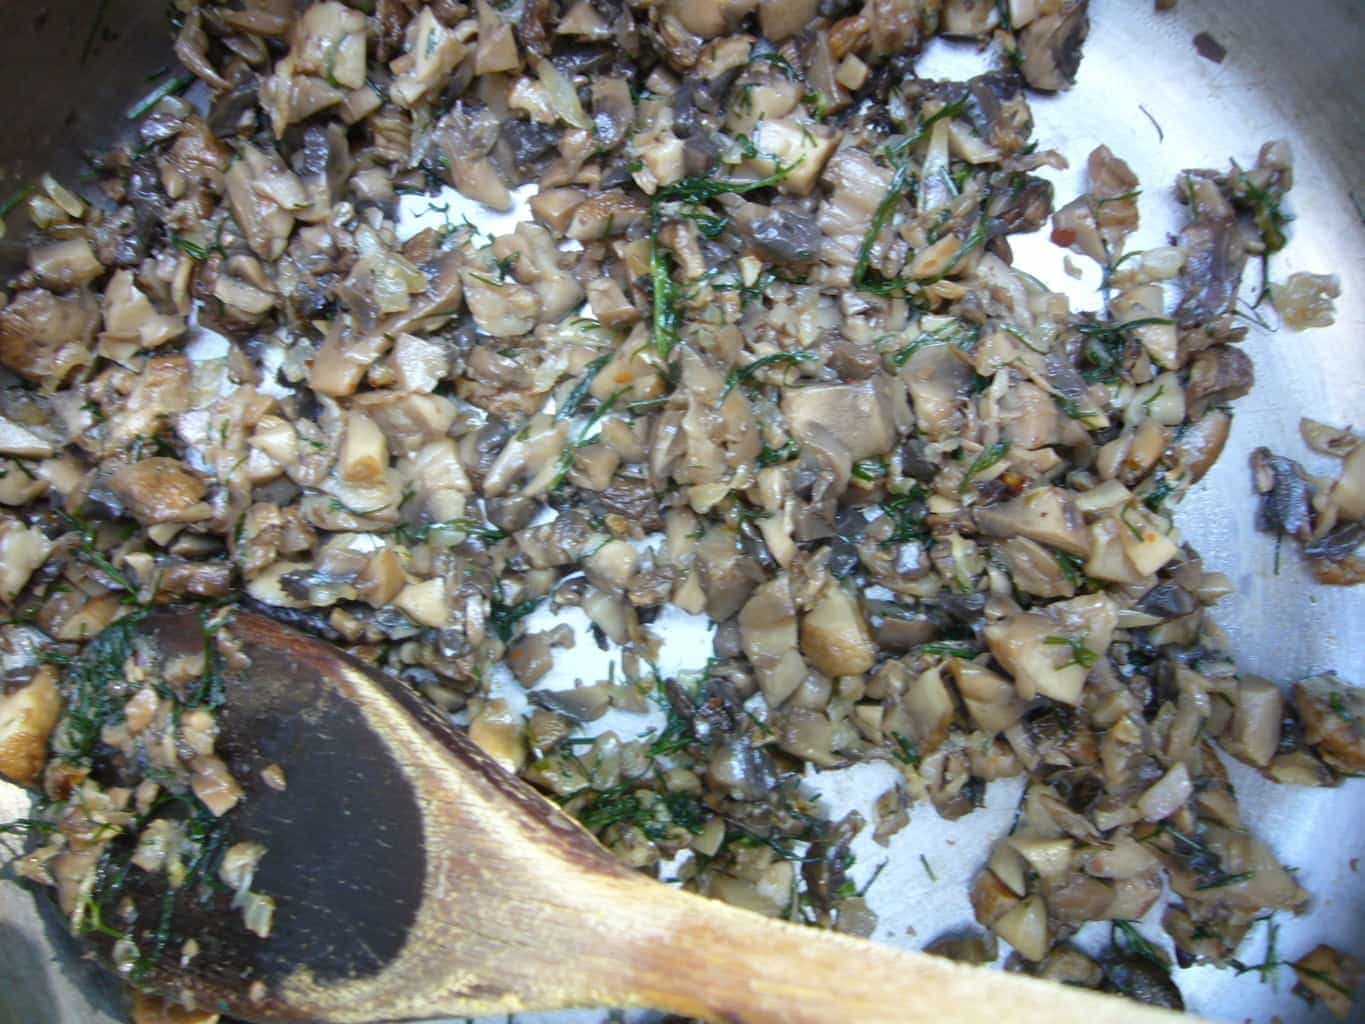 Minced mushrooms sauteed with onions and herbs.